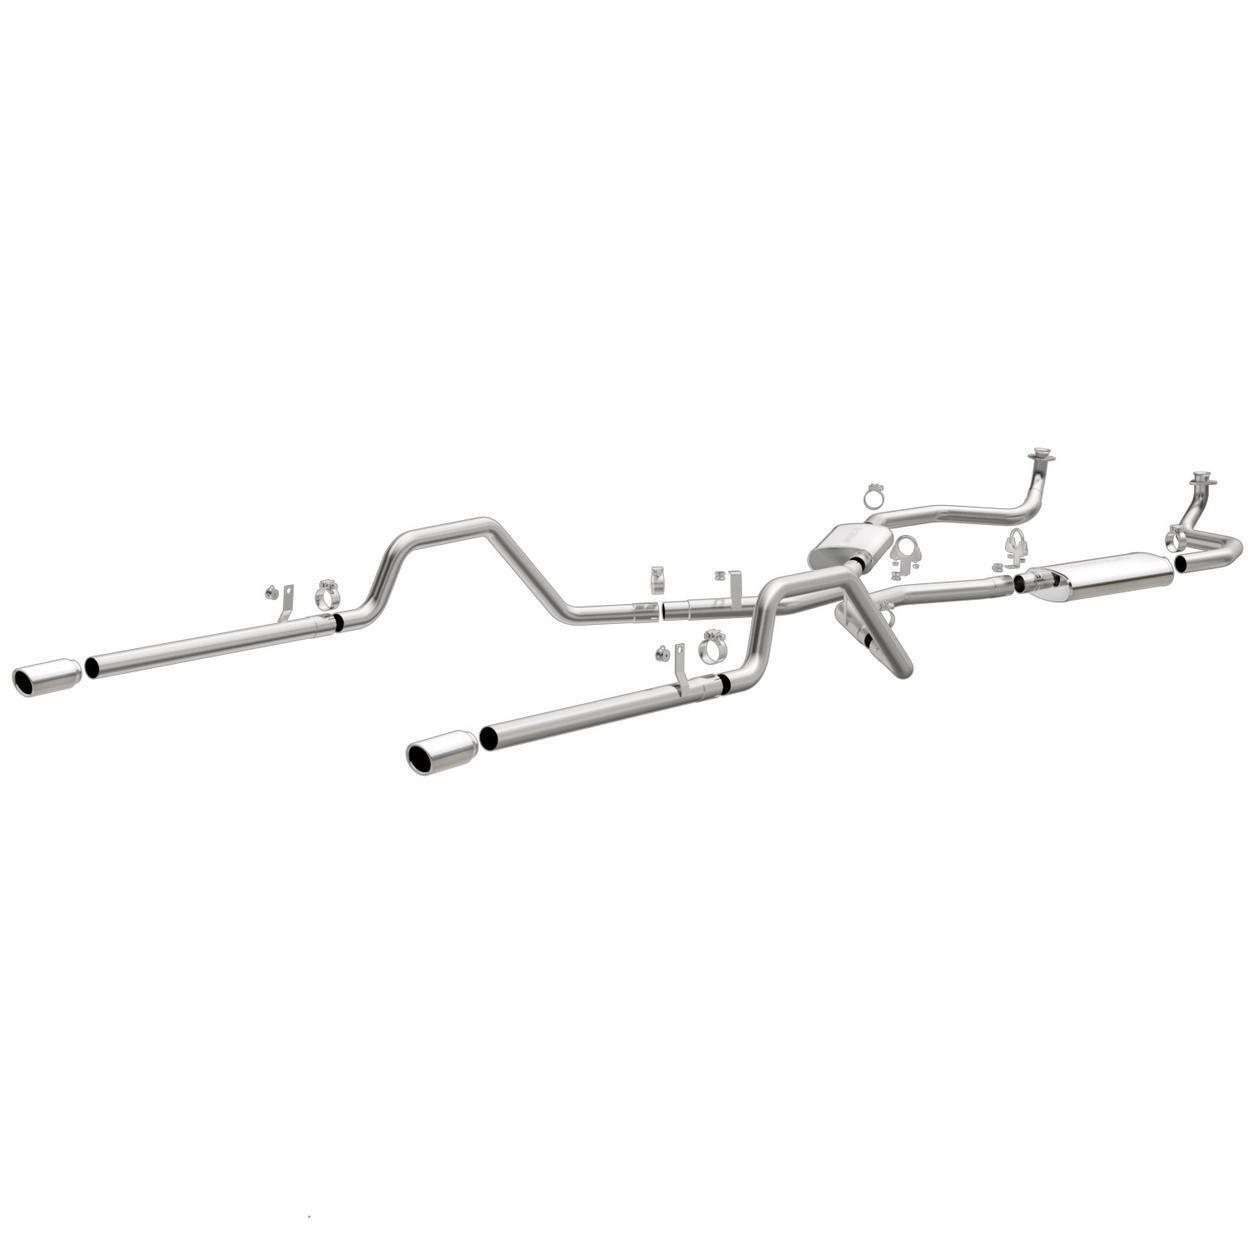 MagnaFlow 16724-AC Exhaust System Kit for 1961-1964 Chevrolet Impala